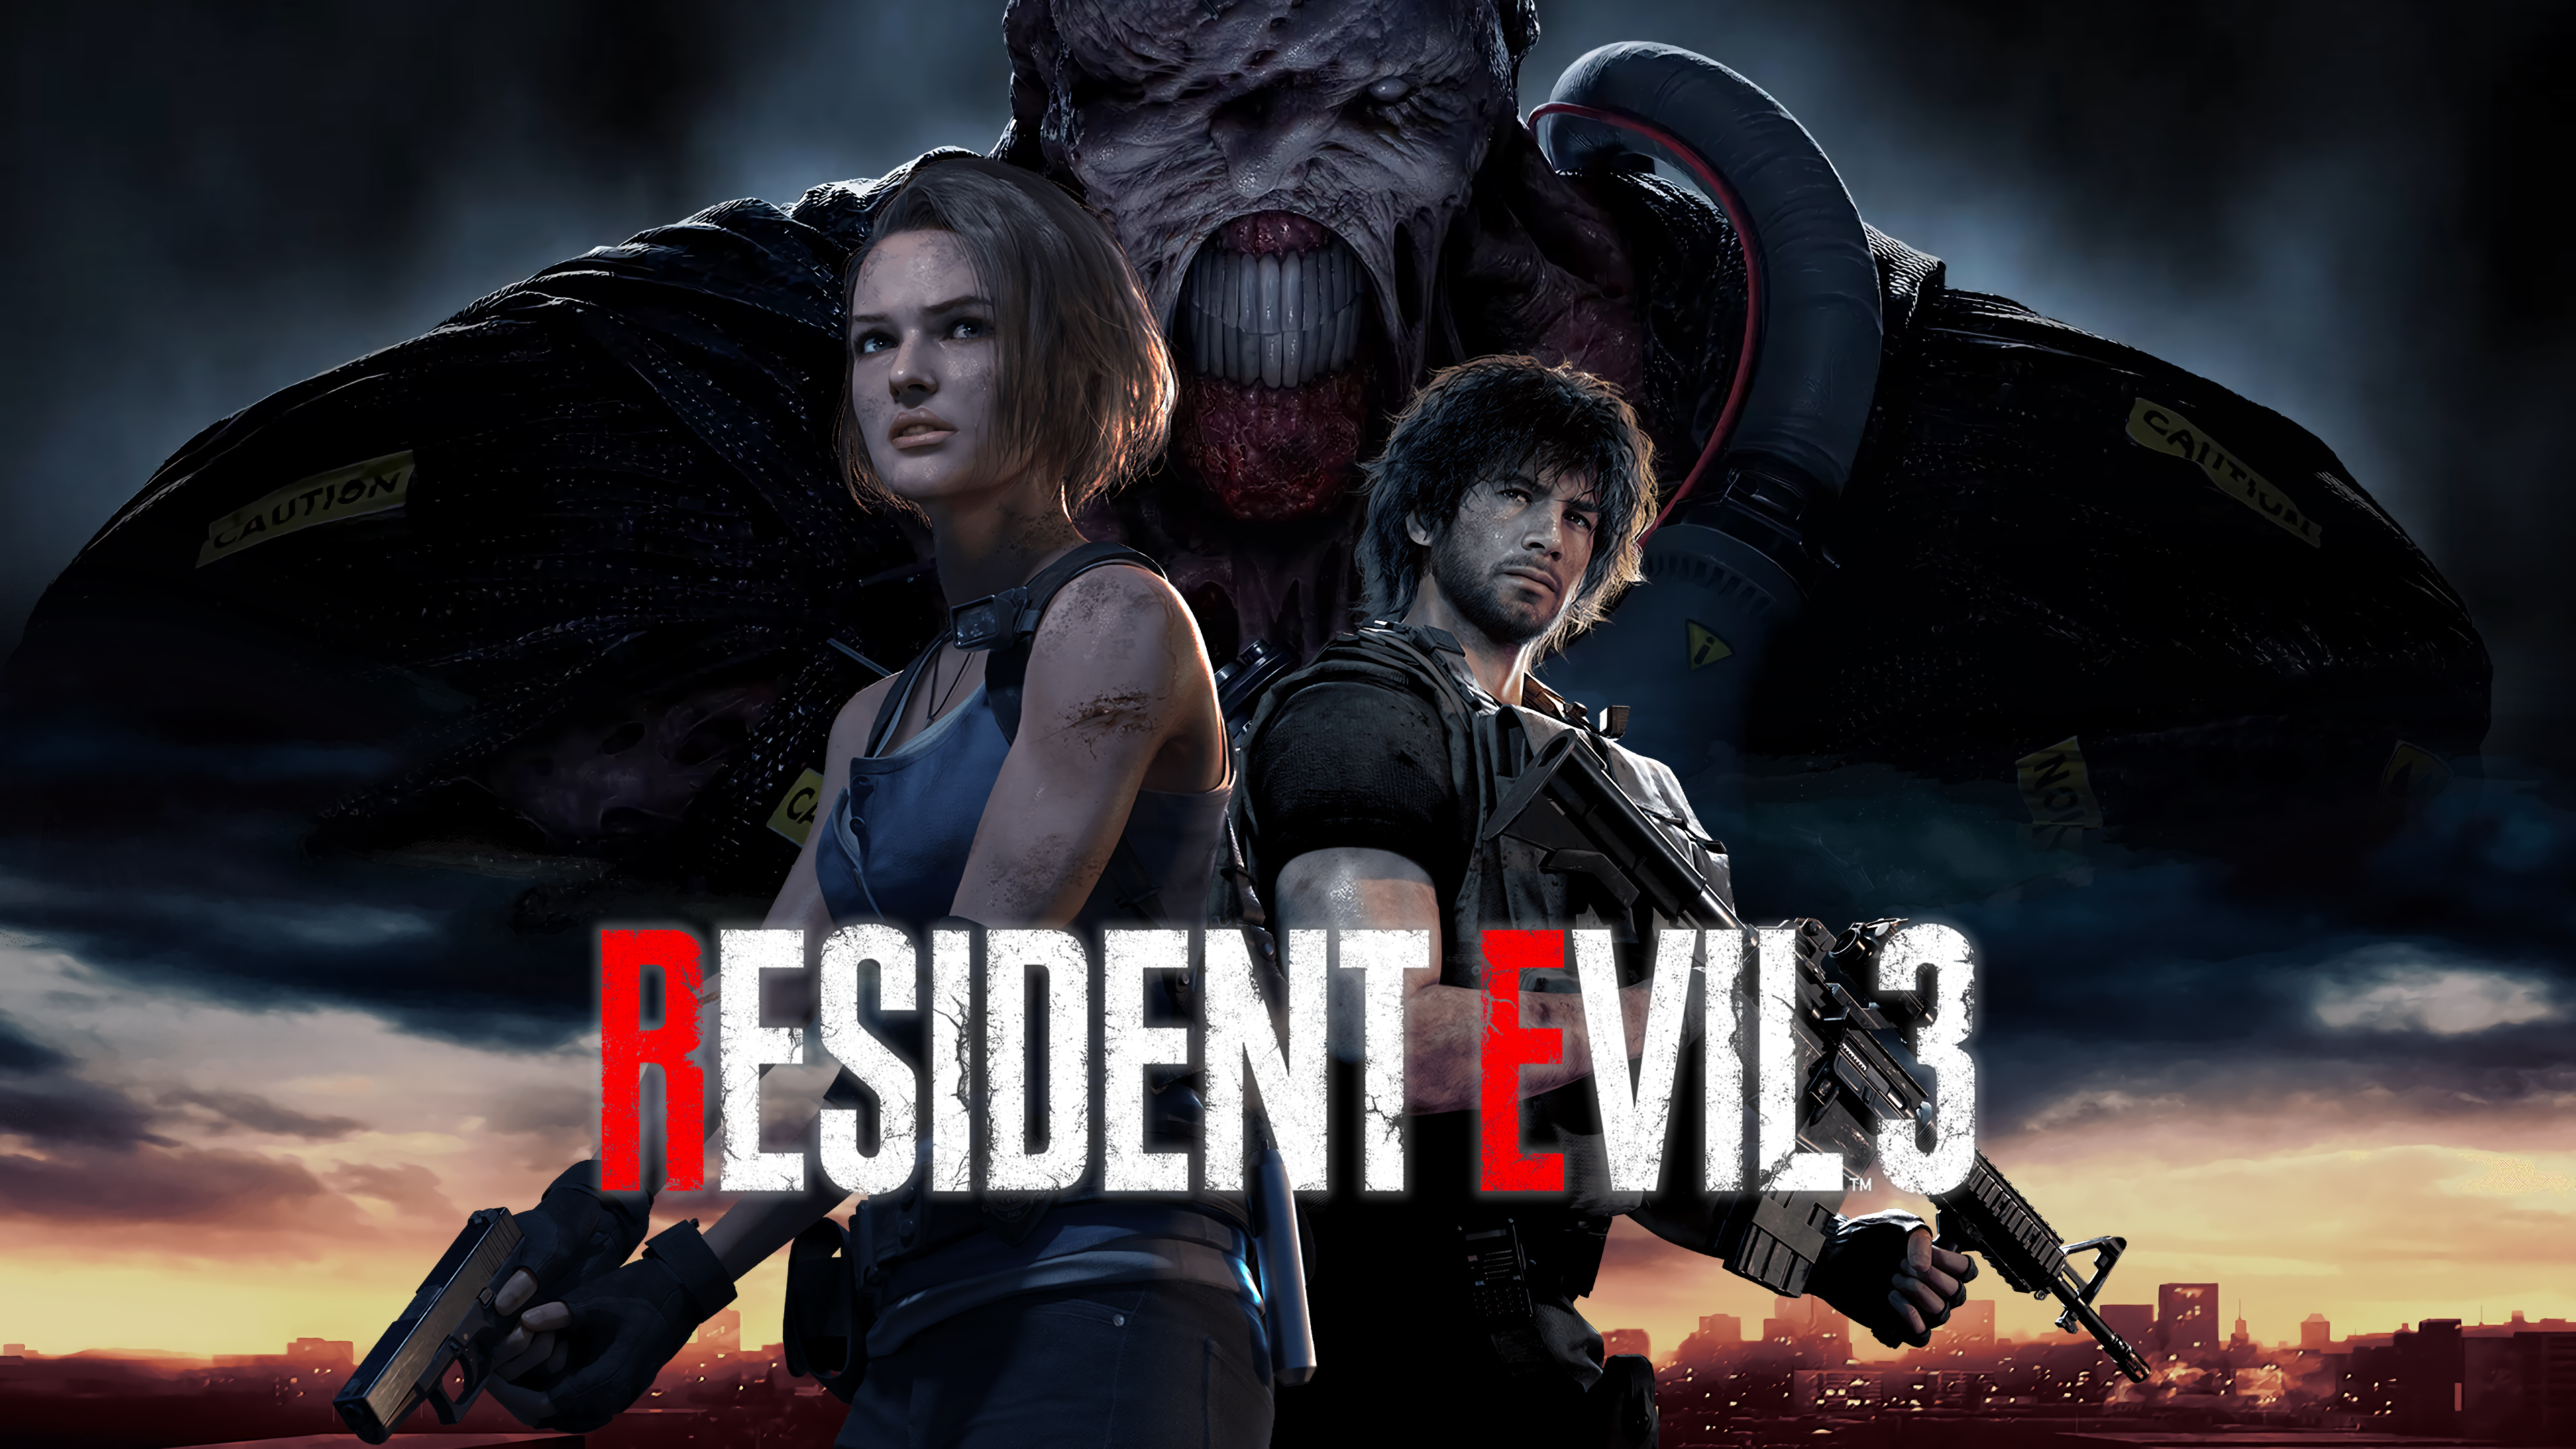 Playable Demo For Resident Evil 3: Raccoon City Out This Week